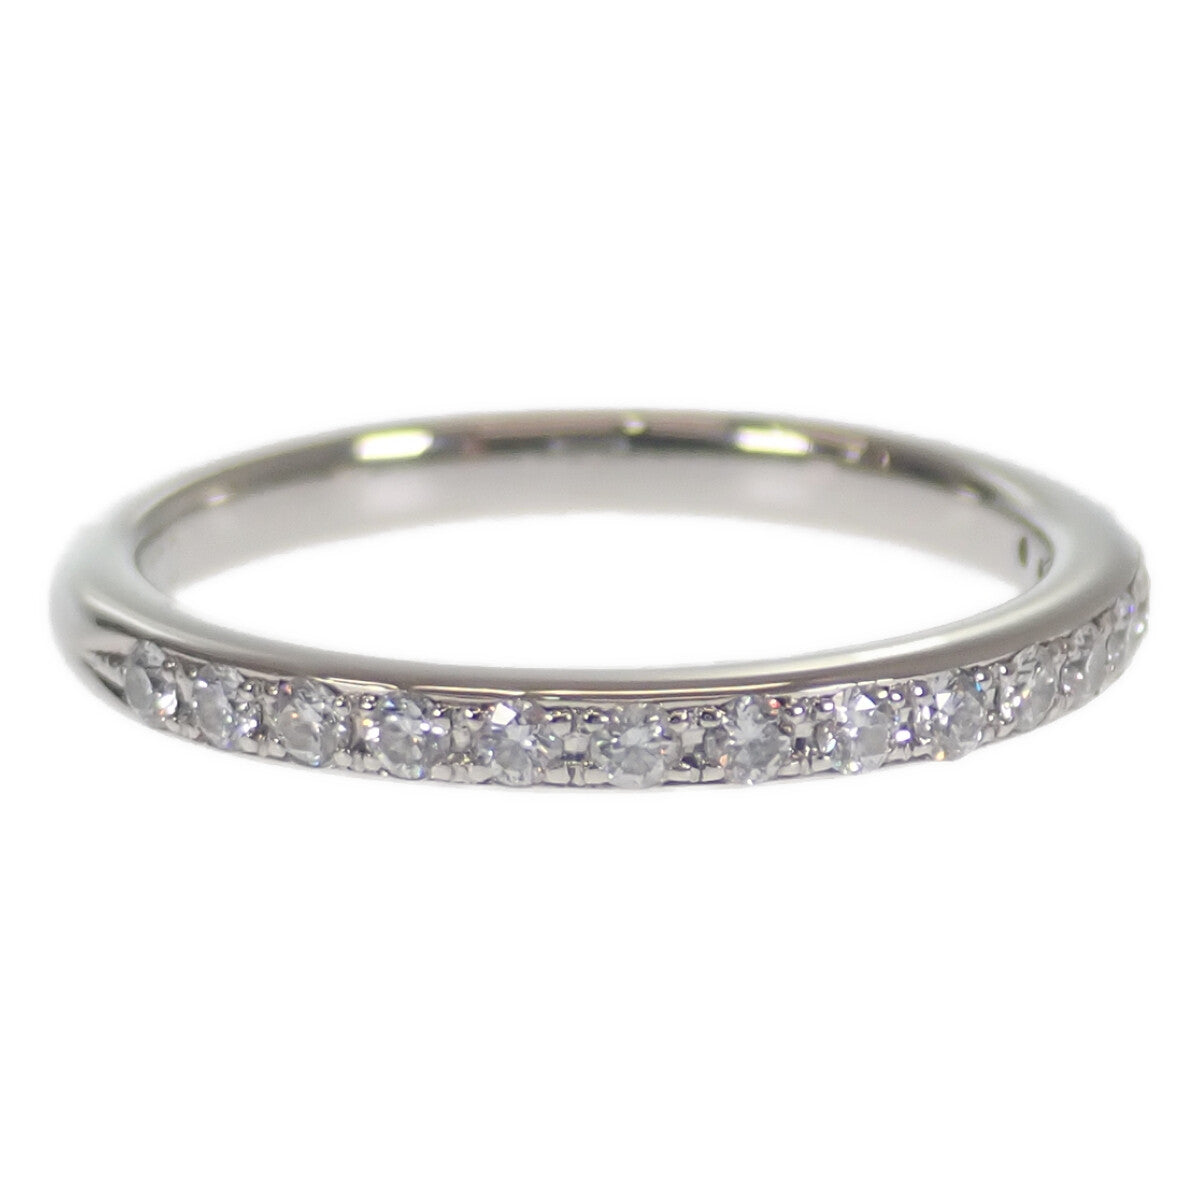 [LuxUness]  Half Eternity Design Ring in PT900 Platinum with 0.21Ct Diamonds, Size 10 - Silver, for Women- Classic and Elegant- (Pre-owned) in Excellent condition